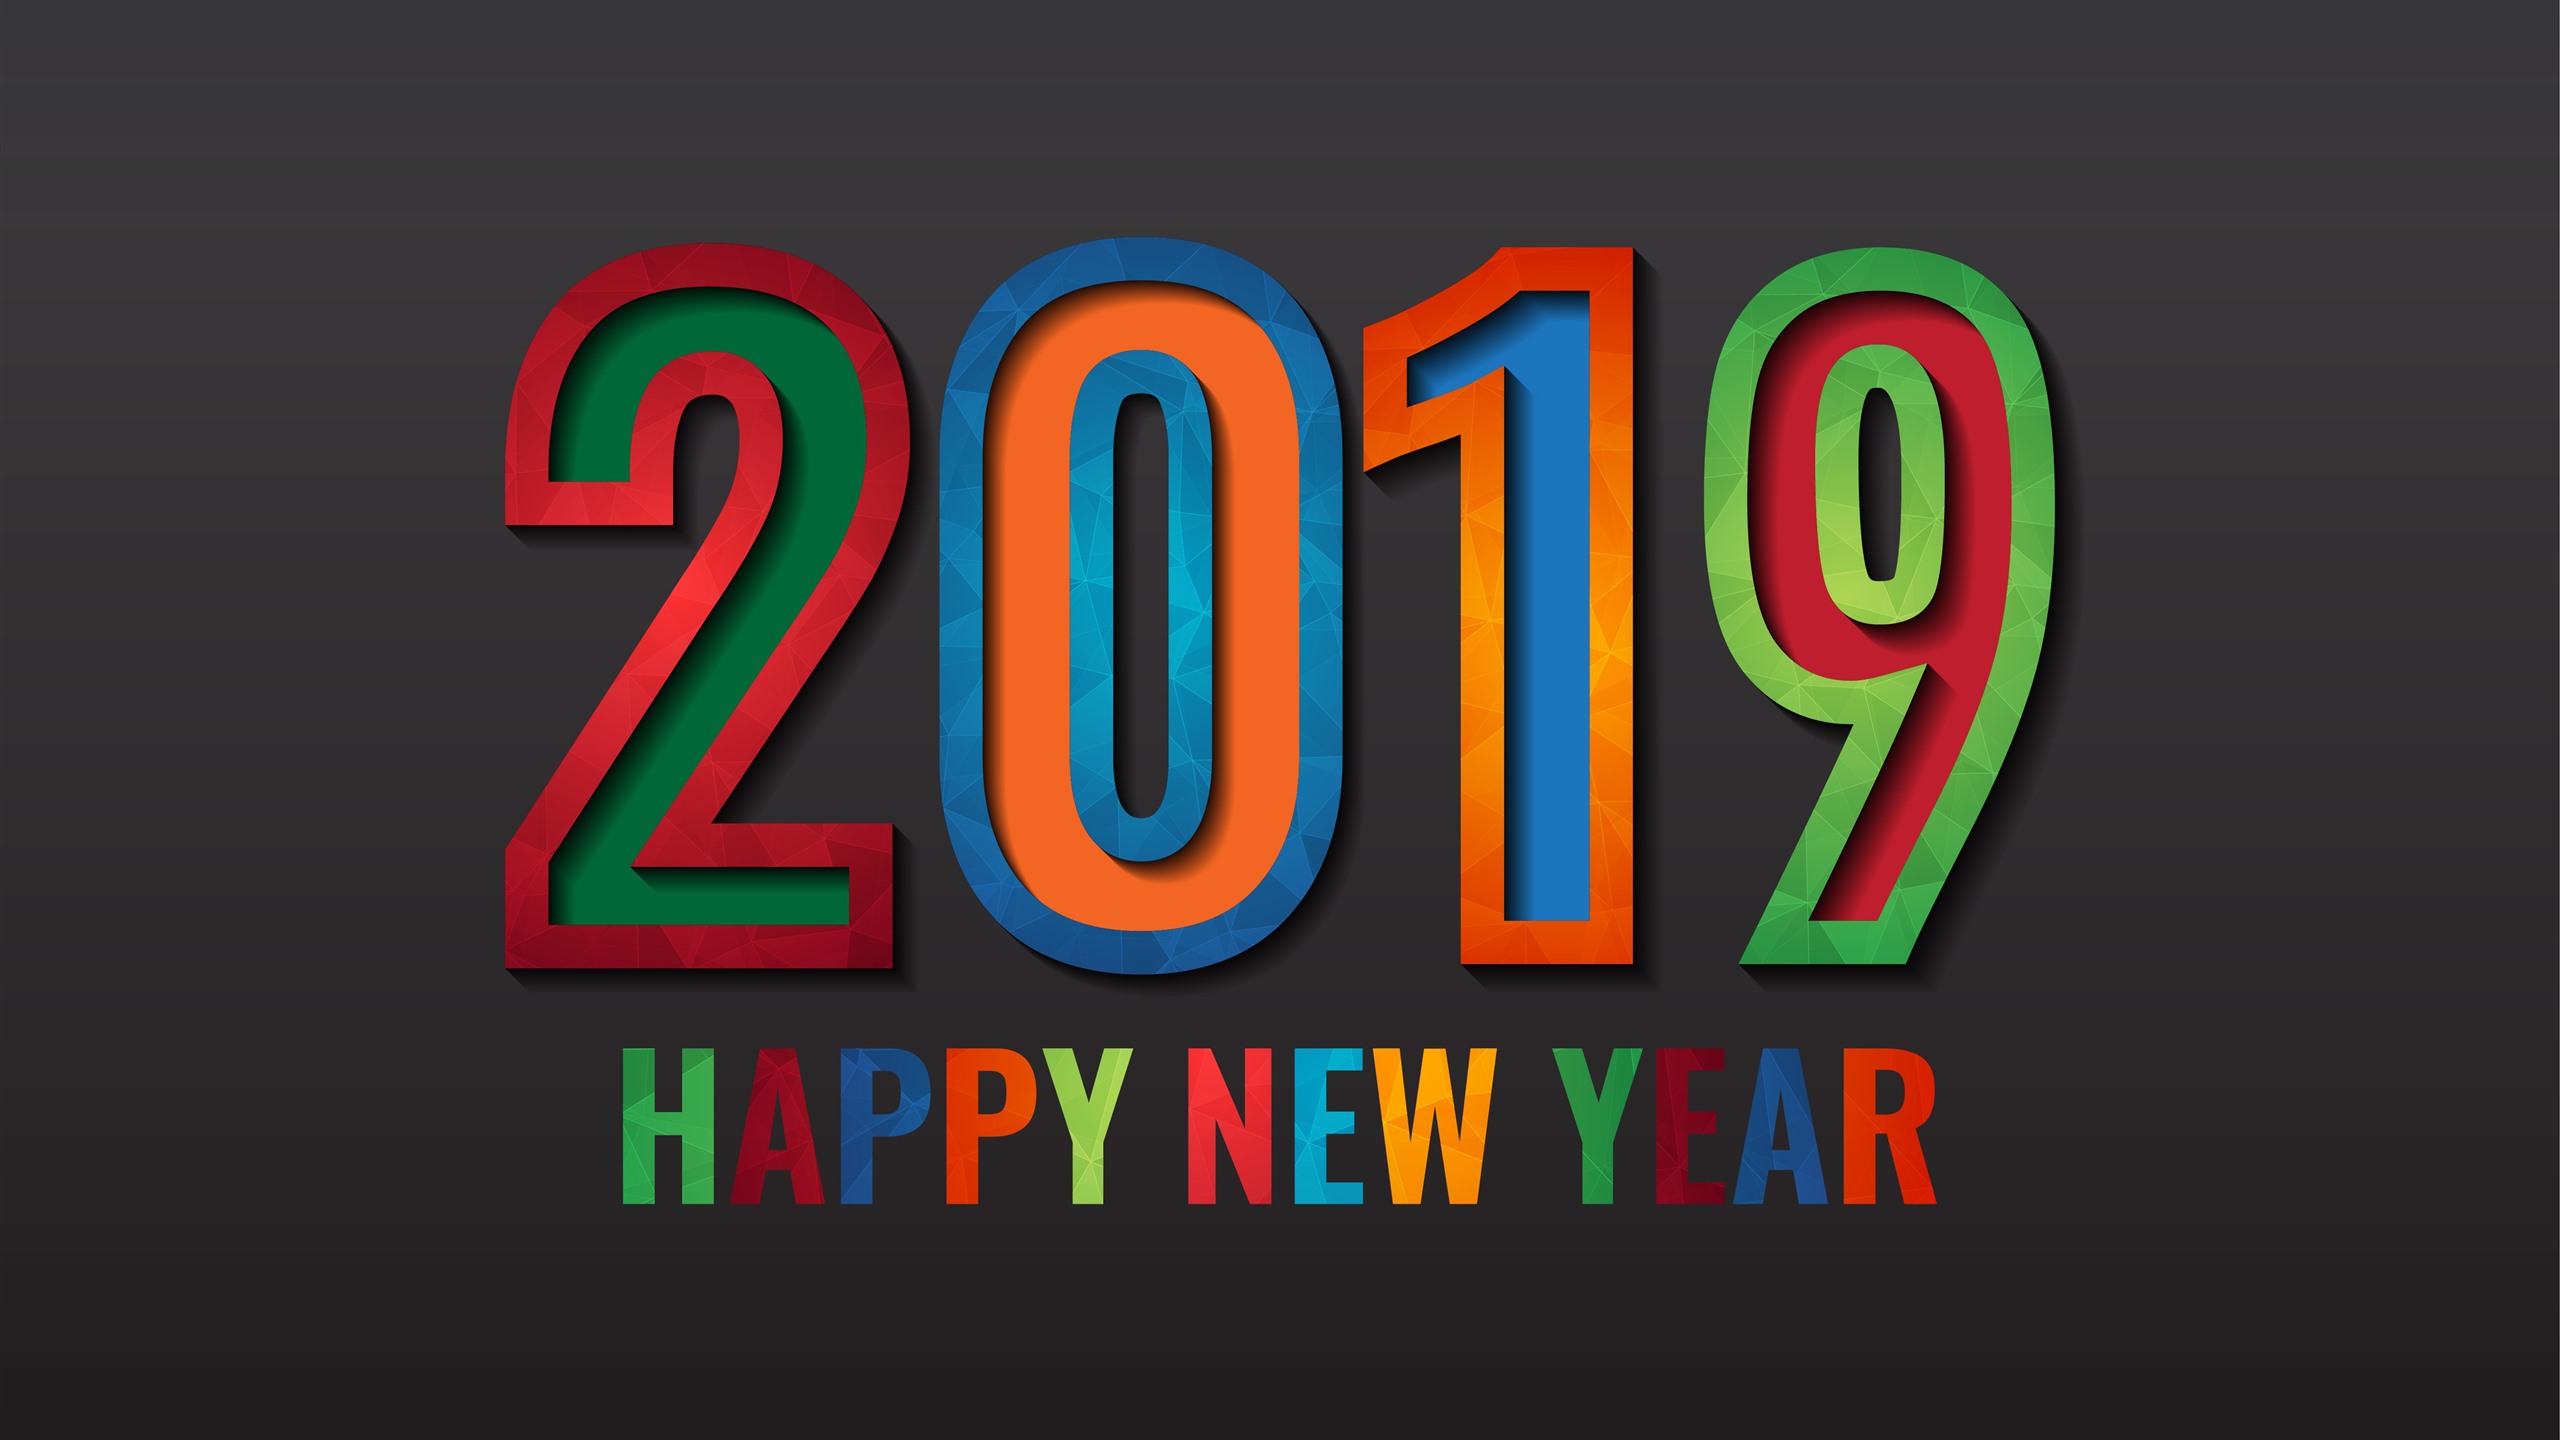 happy new year wallpaper,text,font,logo,graphic design,graphics